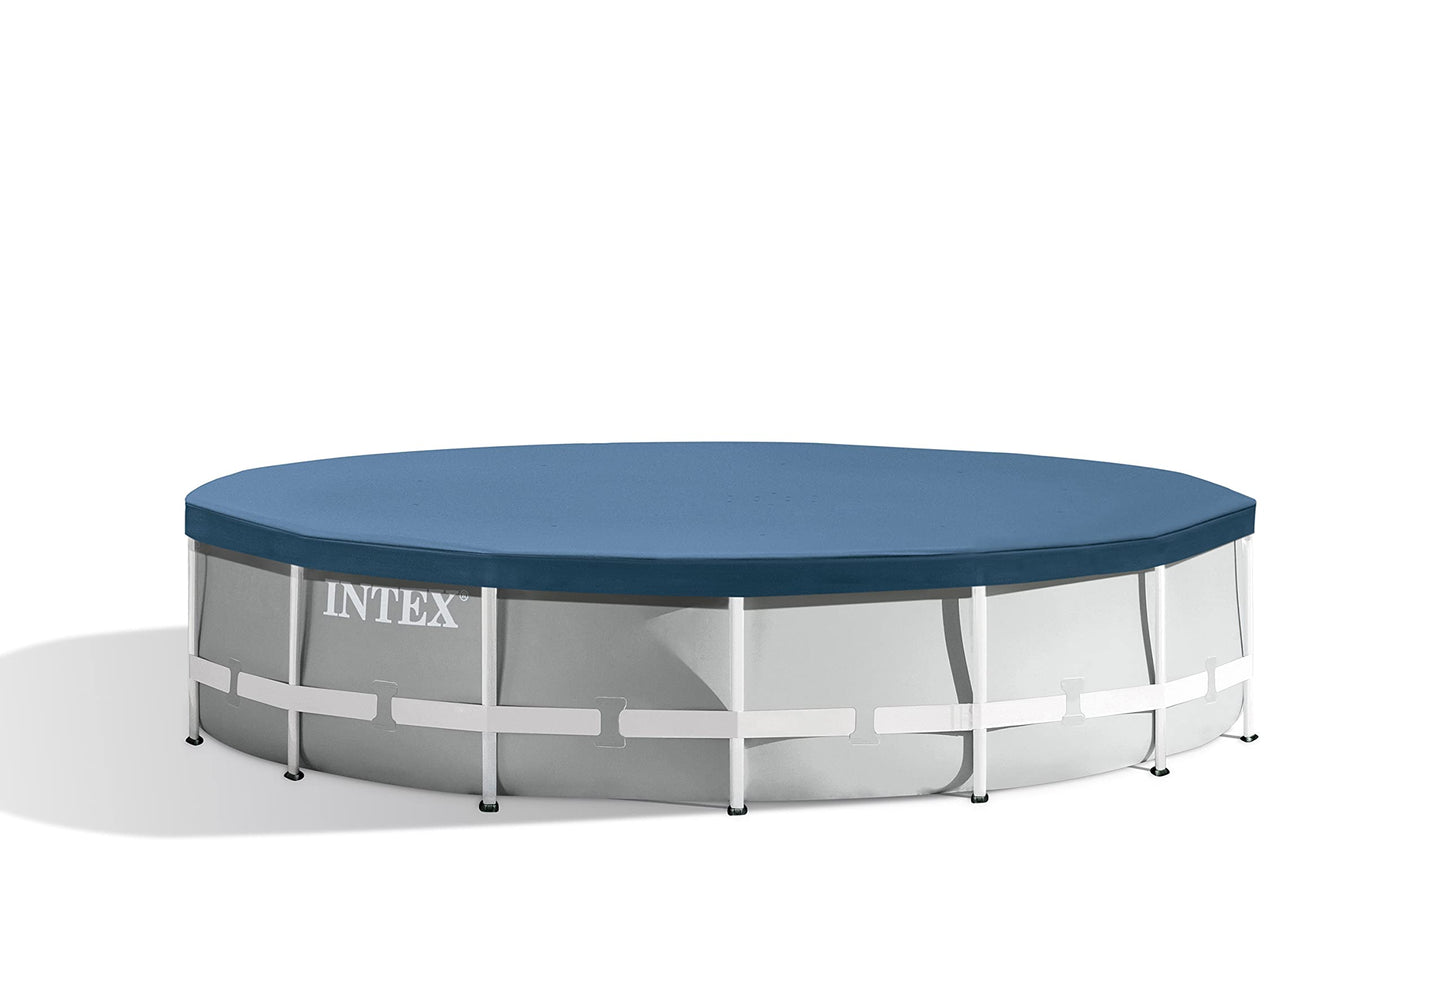 INTEX 26723EH Prism Frame Premium Above Ground Swimming Pool Set: 15ft x 42in – Includes 1000 GPH Cartridge Filter Pump – Removable Ladder – Pool Cover – Ground Cloth Frame Pool